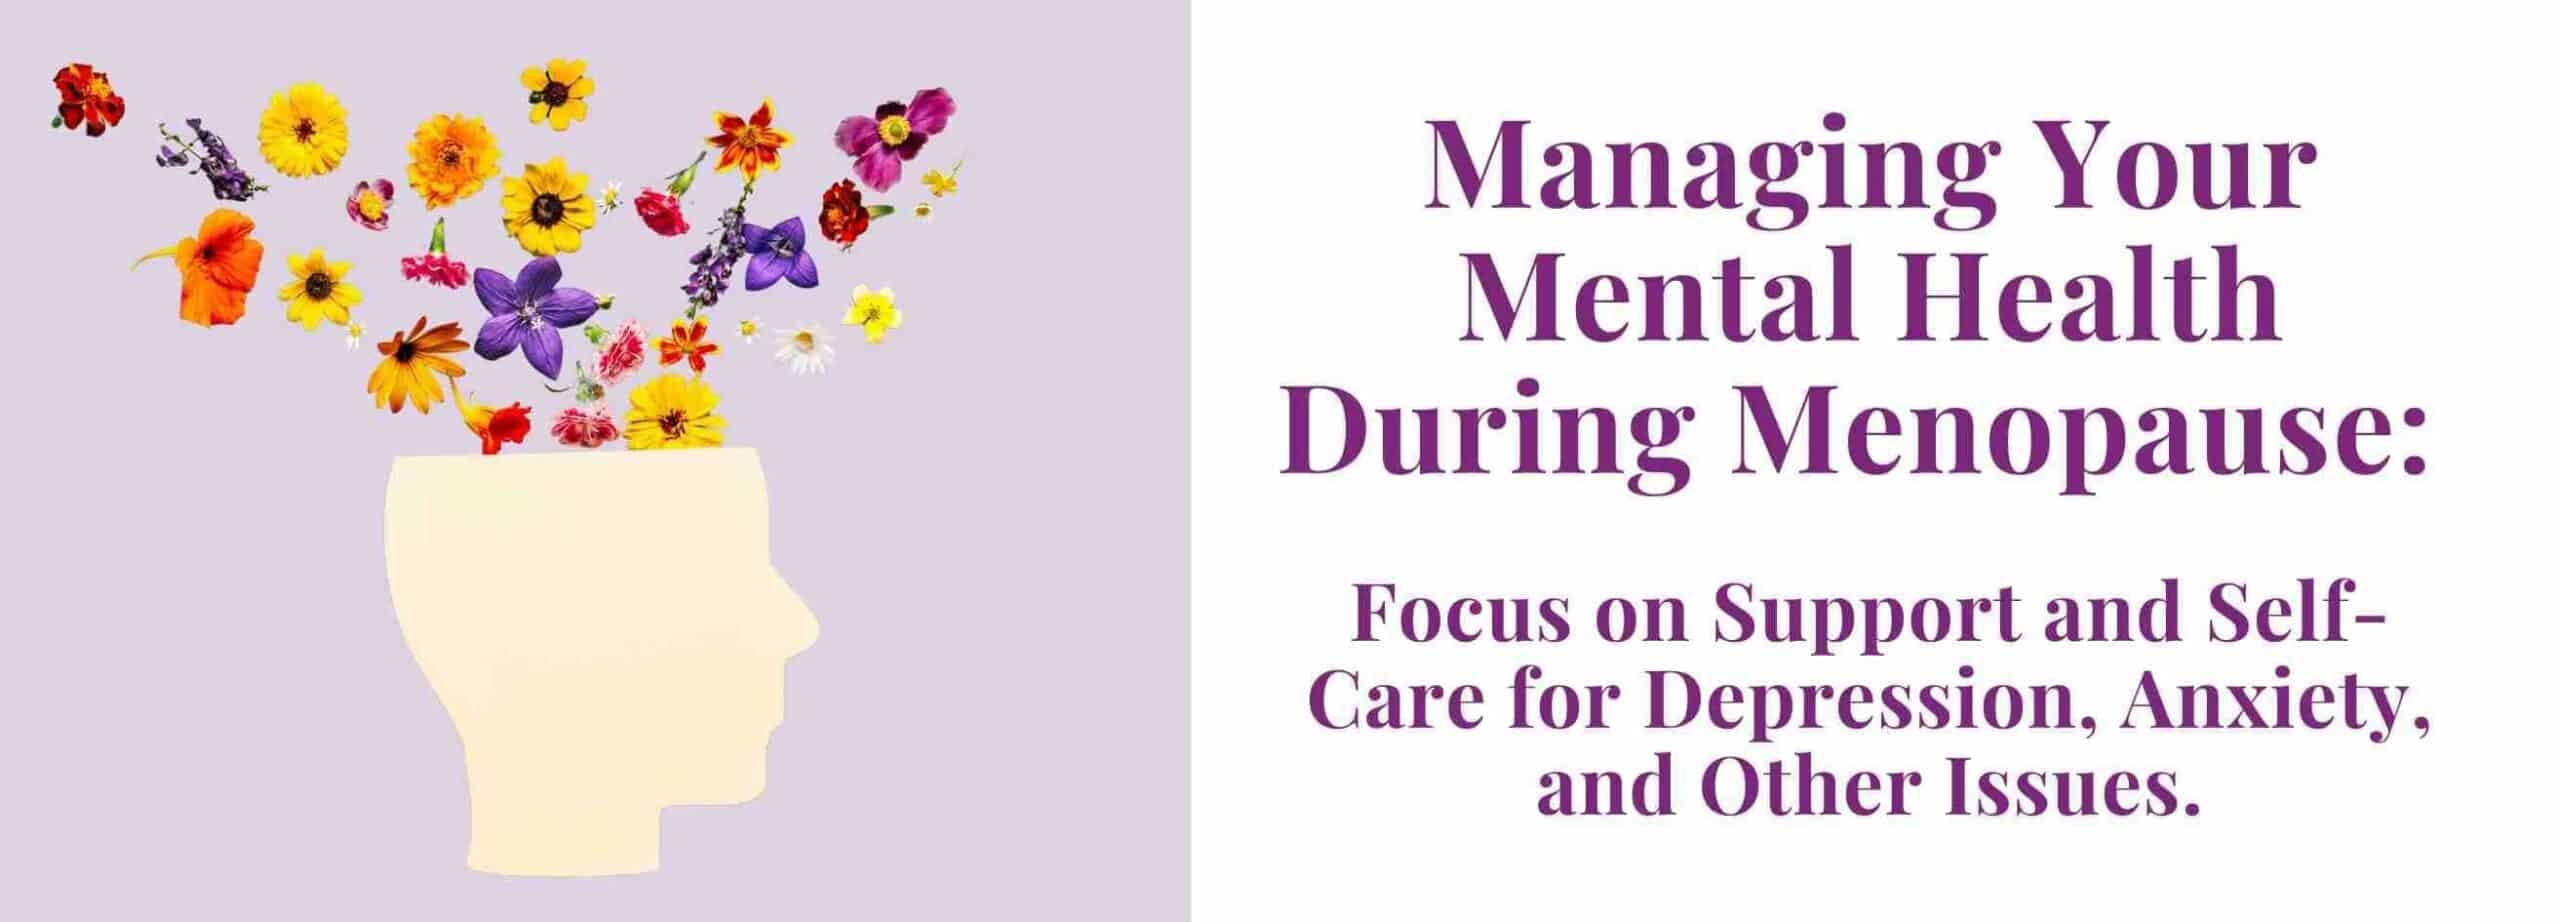 Managing Your Mental Health During Menopause: Focus on Support and Self-Care for Depression, Anxiety, and Other Issues.